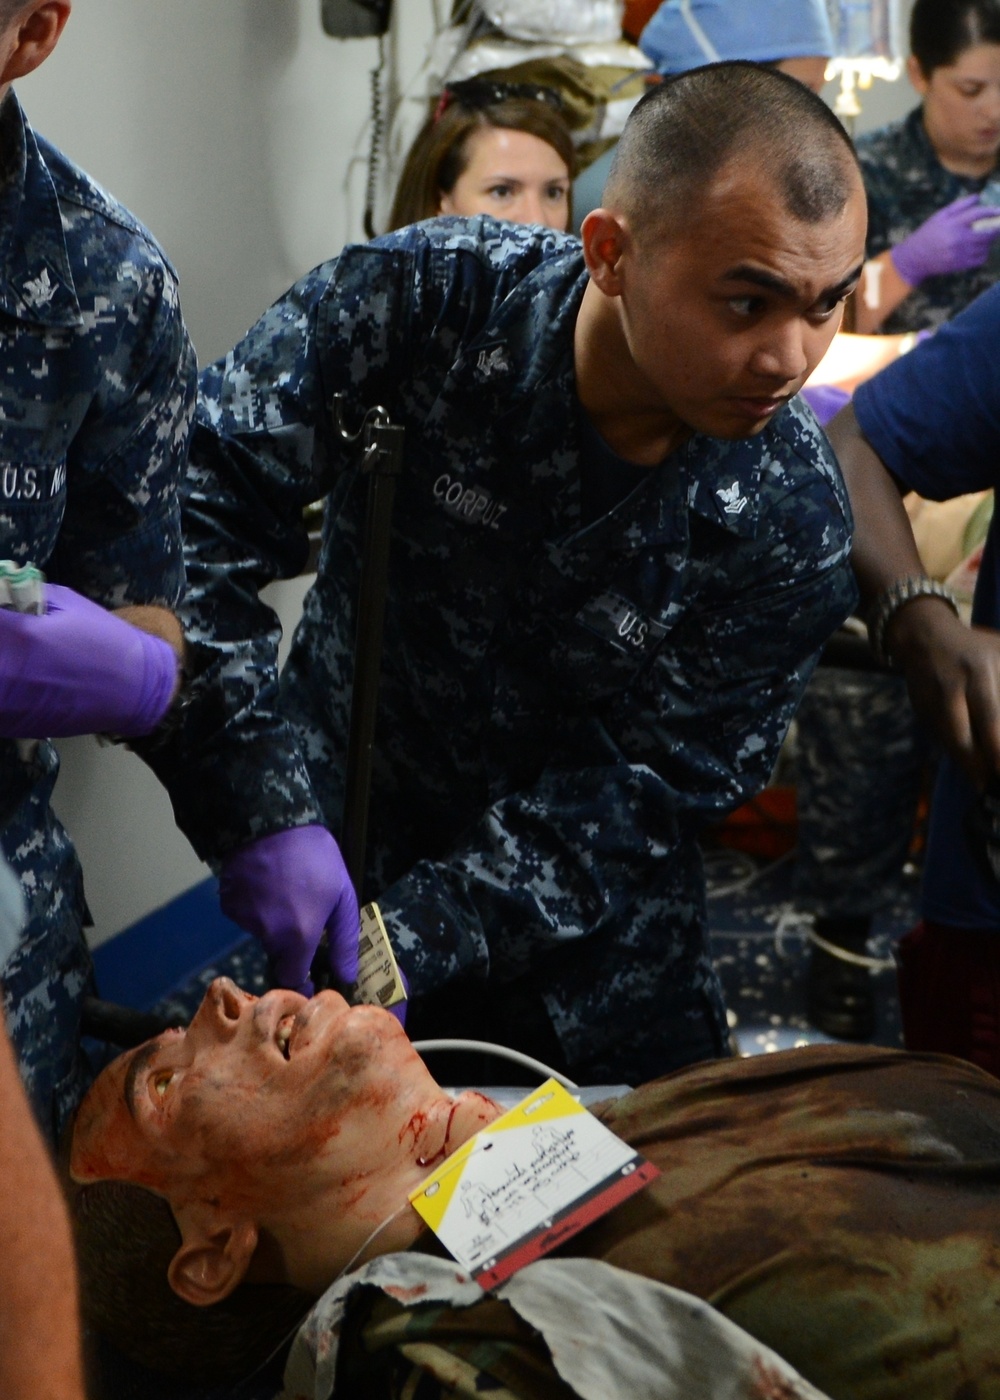 Hospital Corpsman 2nd Class Kirk Corpuz gives medical care to a simulated patient in medical triage of the amphibious assault ship USS Bataan (LHD 5).